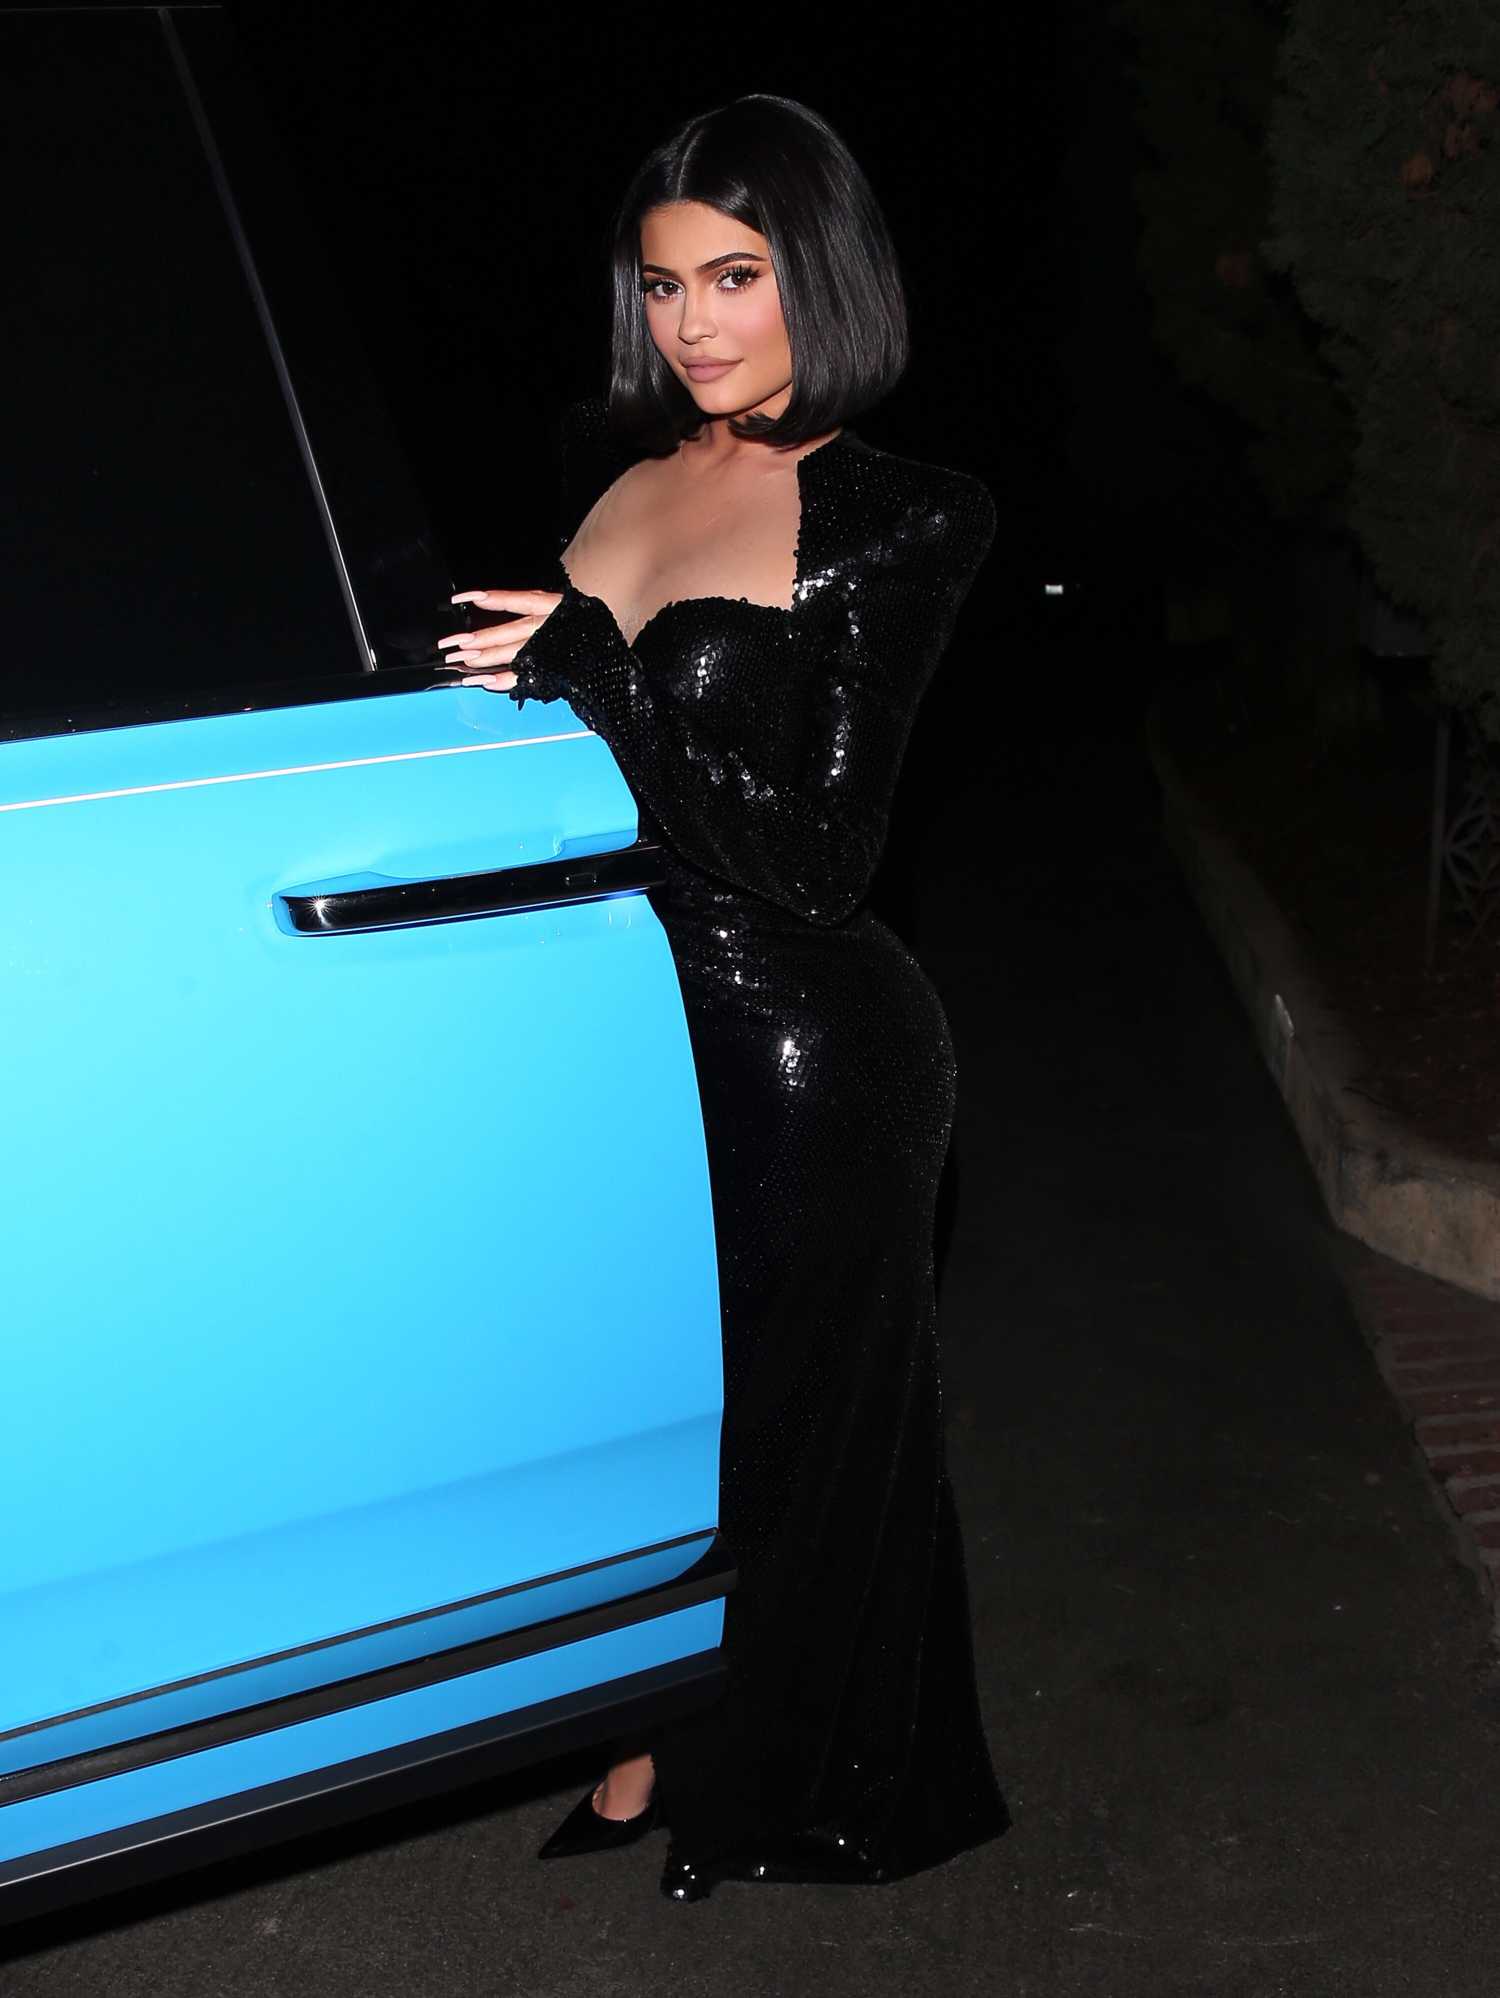 Kylie Jenner in a Black Dress Arrives at Music Mogul P.Diddy’s Private ...